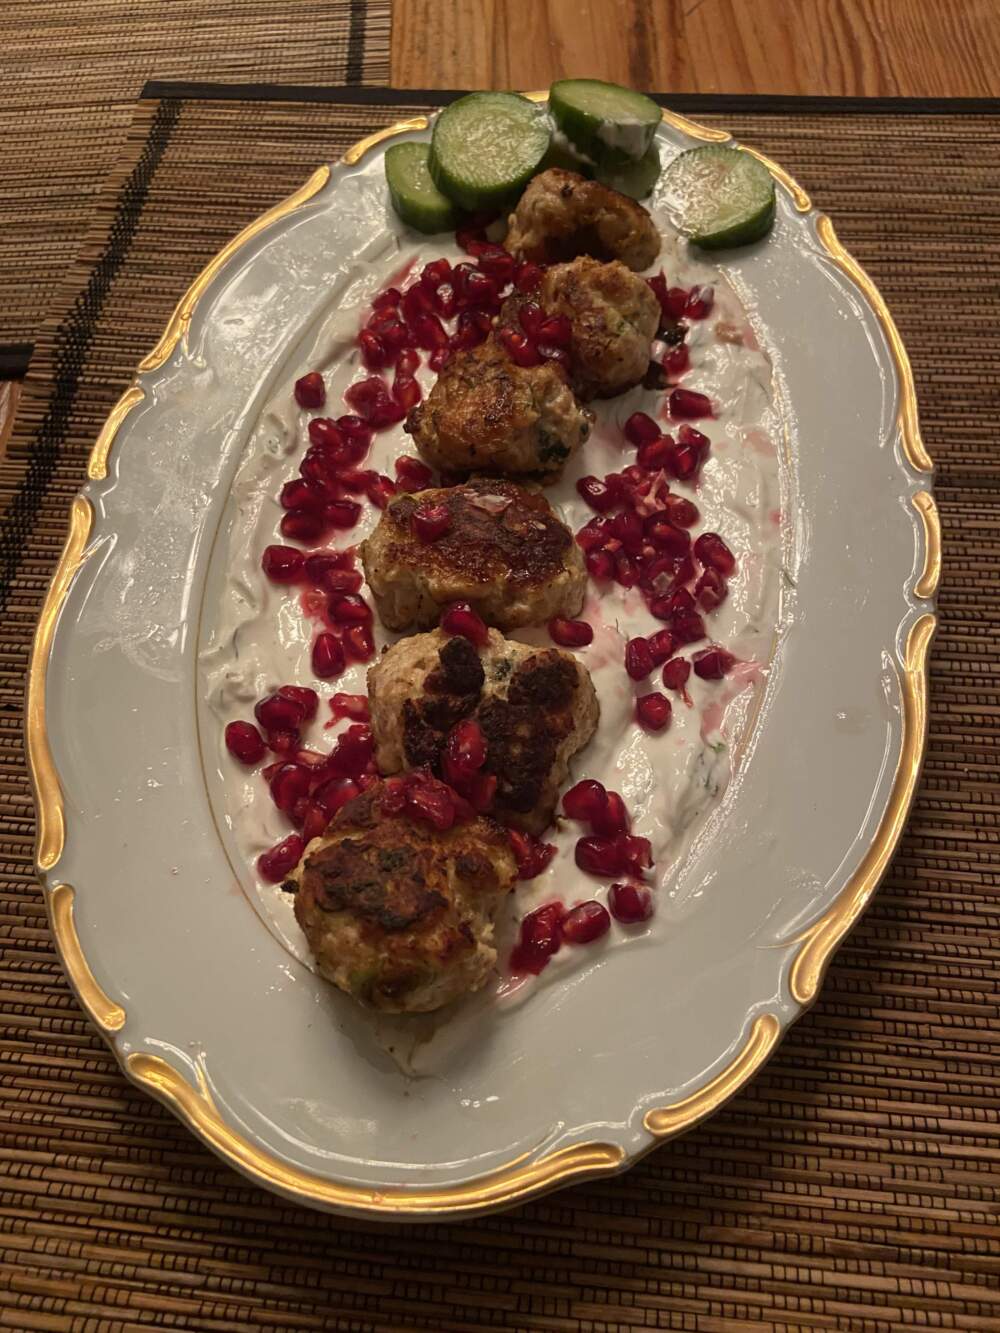 Chicken meatballs over Greek yogurt sauce with quick pickled cucumbers and pomegranate seeds. (Kathy Gunst/Here & Now)